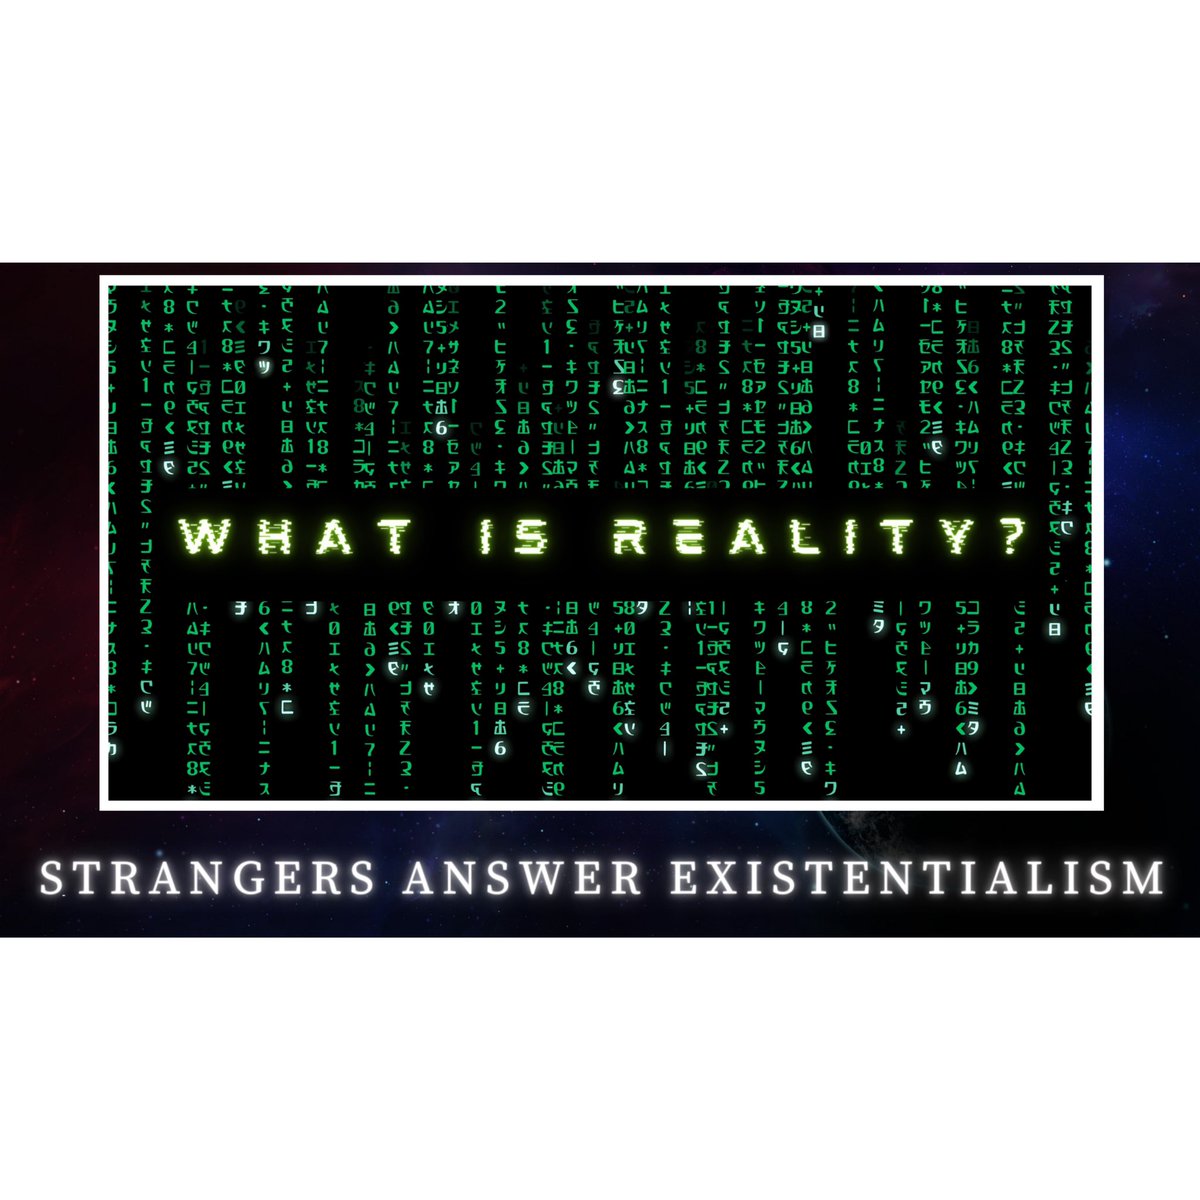 youtu.be/IDpwJVcdP5c?si… What is reality? - - #reality #whatisreality #real #whatisreal #realityshifting #realityshow #life #whatislife #lifecoaching #lifeisanillusion #realityisanillusion #ufo #ufos #god #whatisgod #whoisgod #philosophy #existence #existentialism ##epistemology